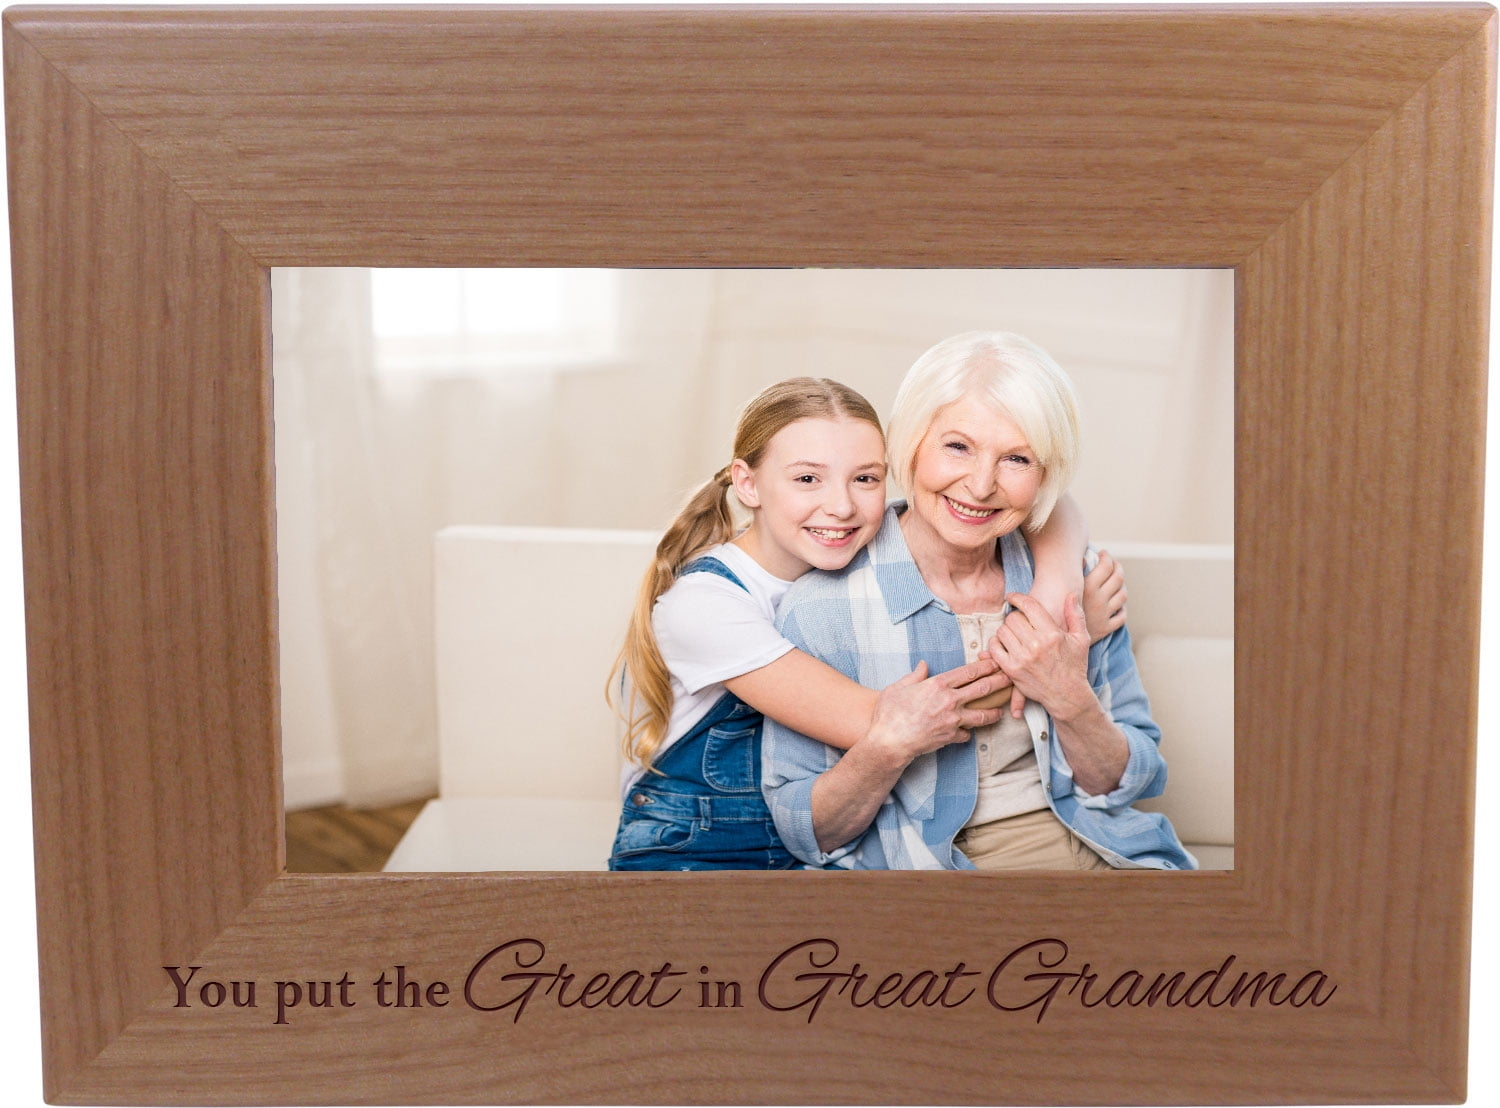 You put the Great in Great Grandma 4-inch x 6-Inch Wood Picture Frame ...